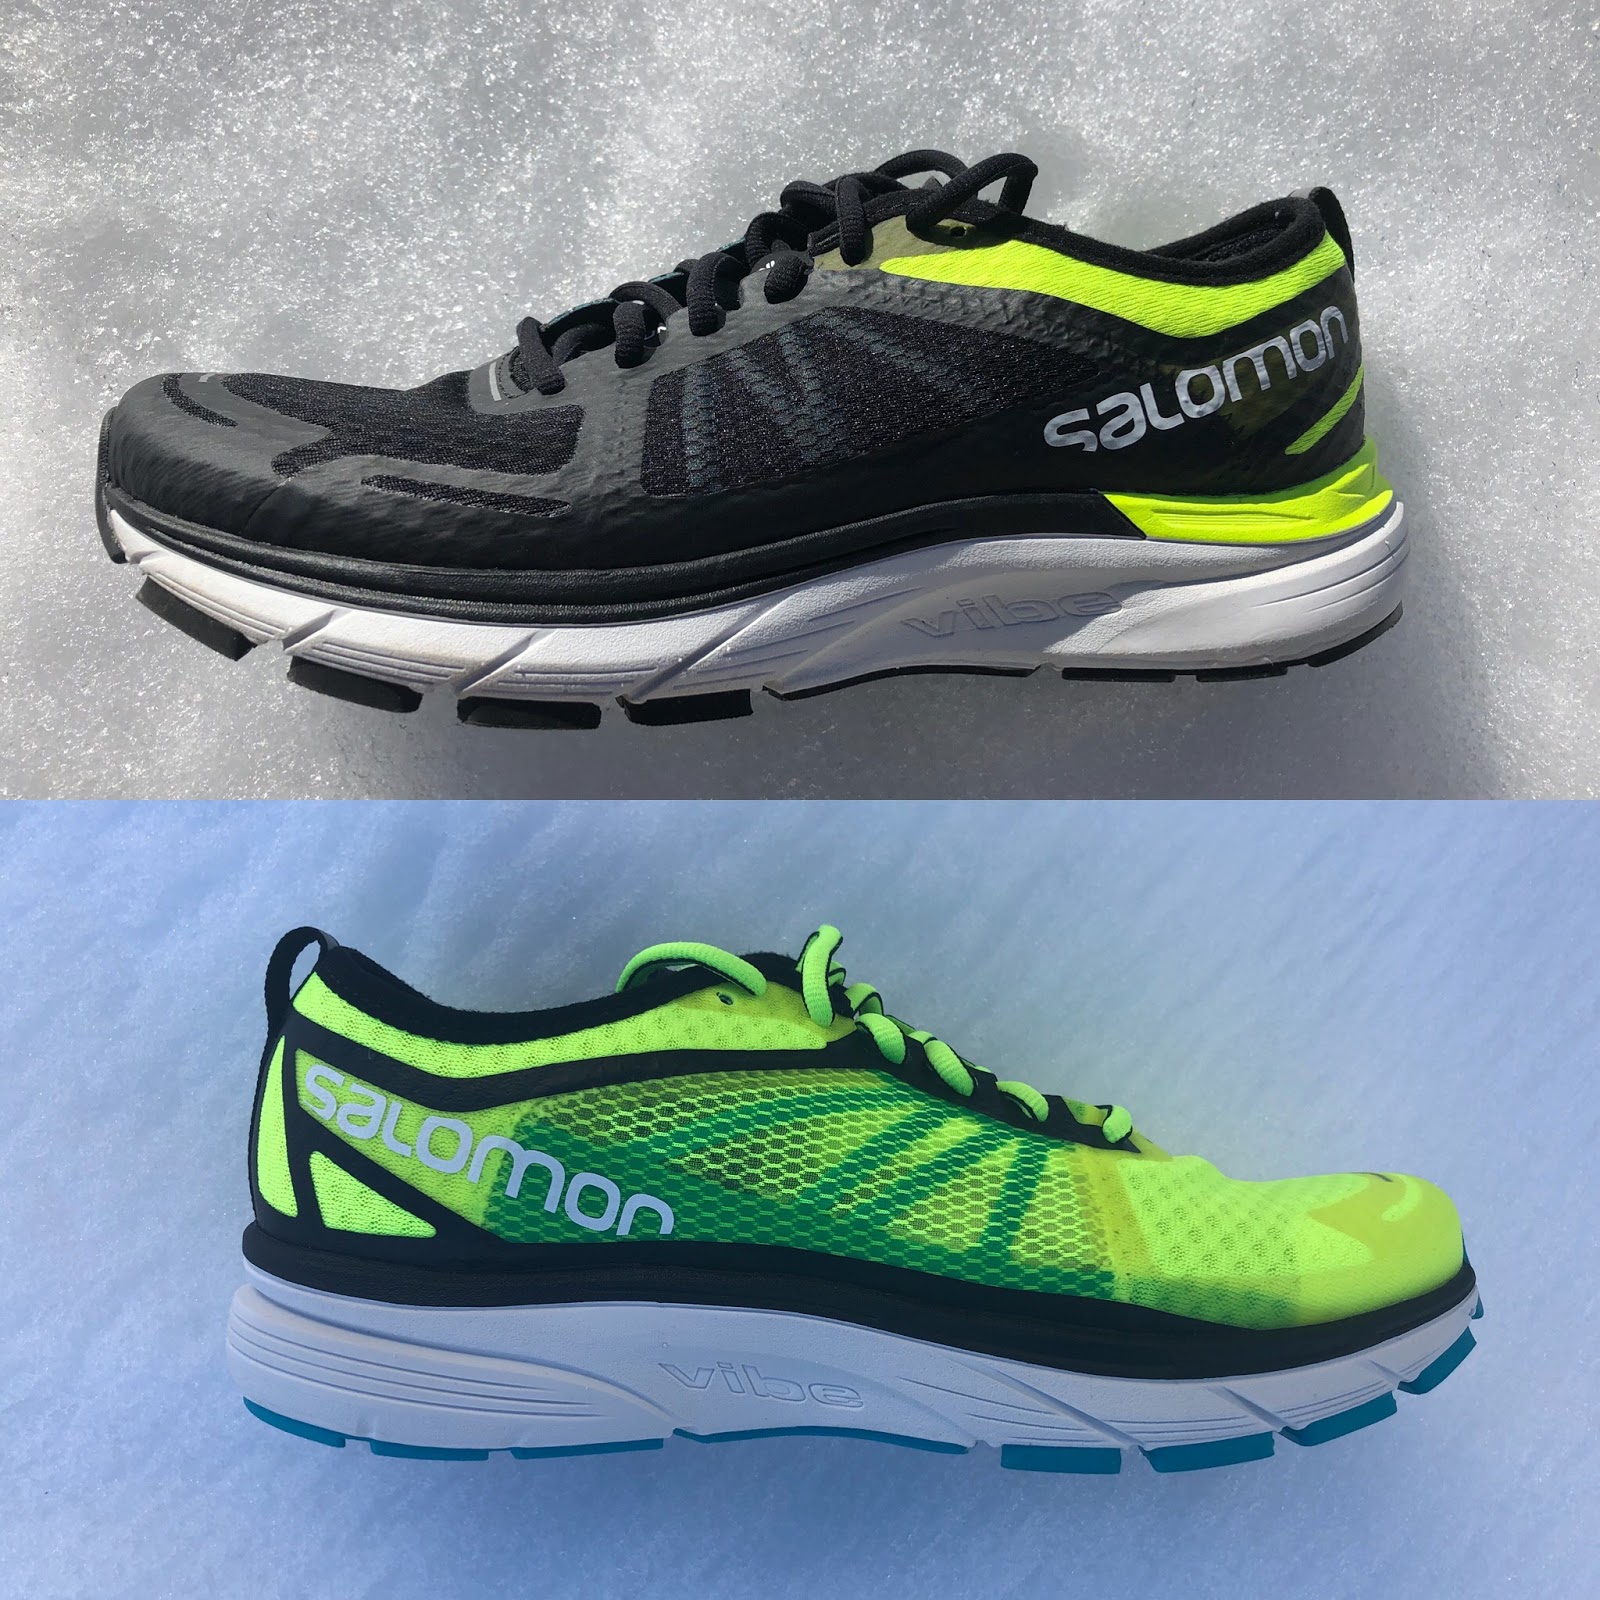 Road Run: Salomon Running Avenue RA Sonic RA Max Reviews: Masterpieces of Functional Run Shoe Design. Stable, Supportive and Fast